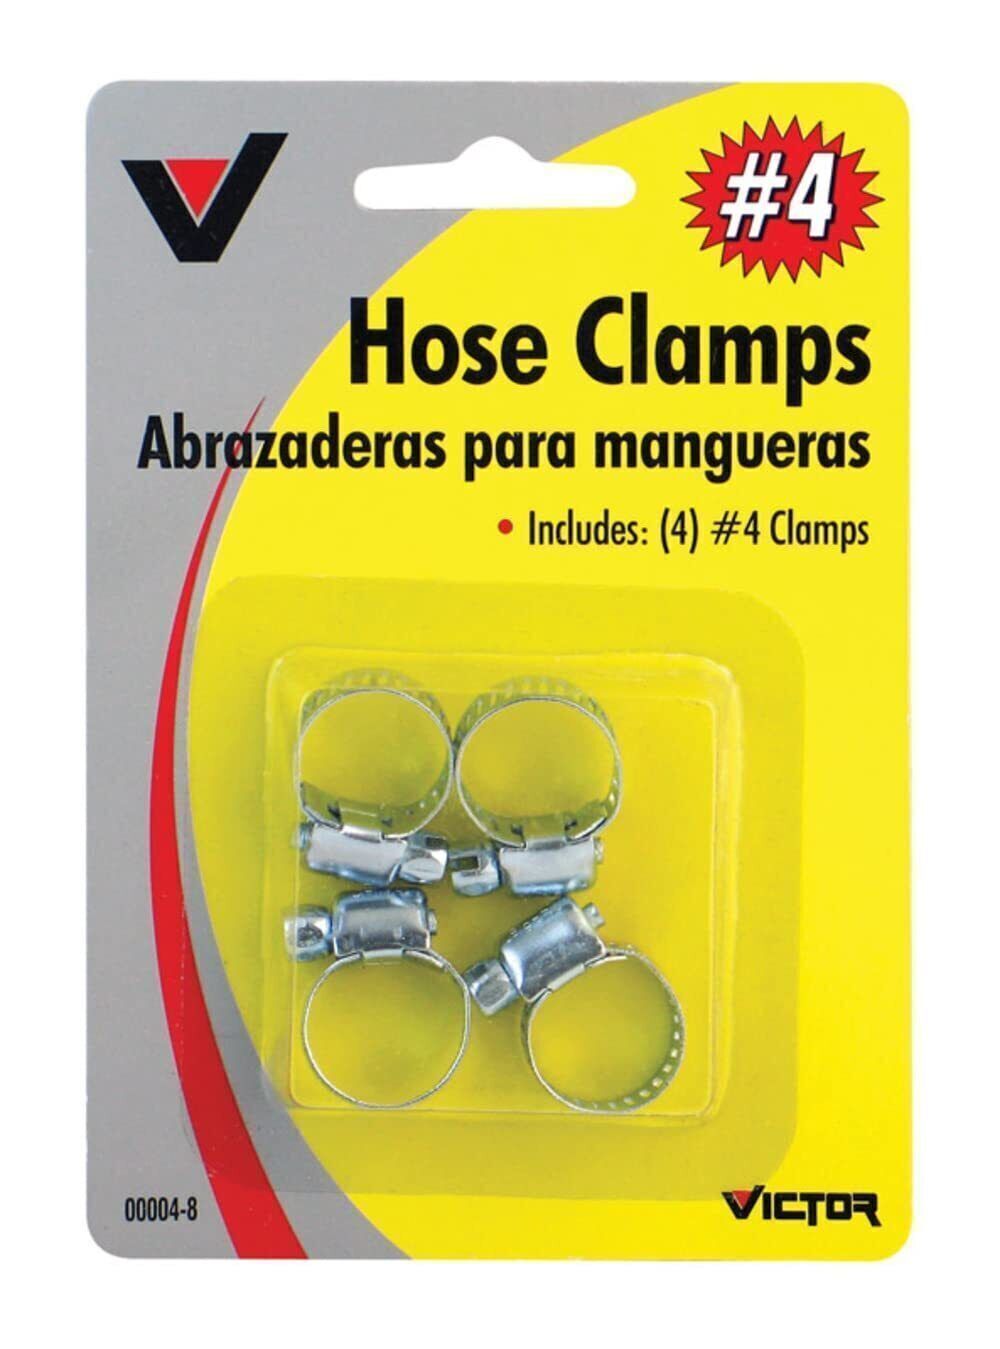 Victor 22-5-00004-8 Hose Clamps - $18.00